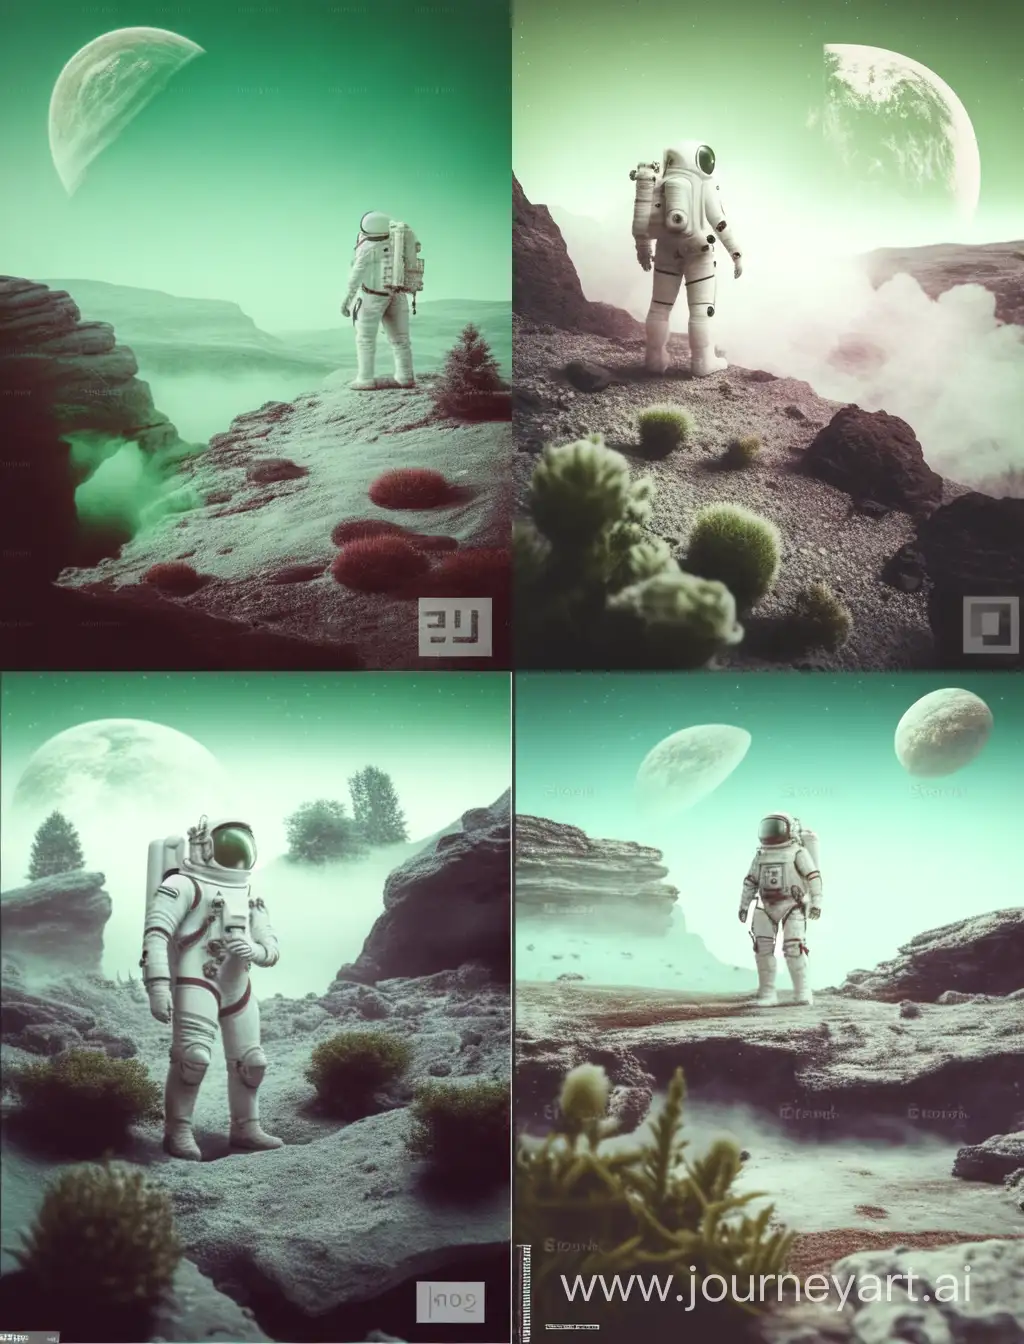 Lonely-Astronaut-Contemplating-Distant-Planets-in-Futuristic-Landscape